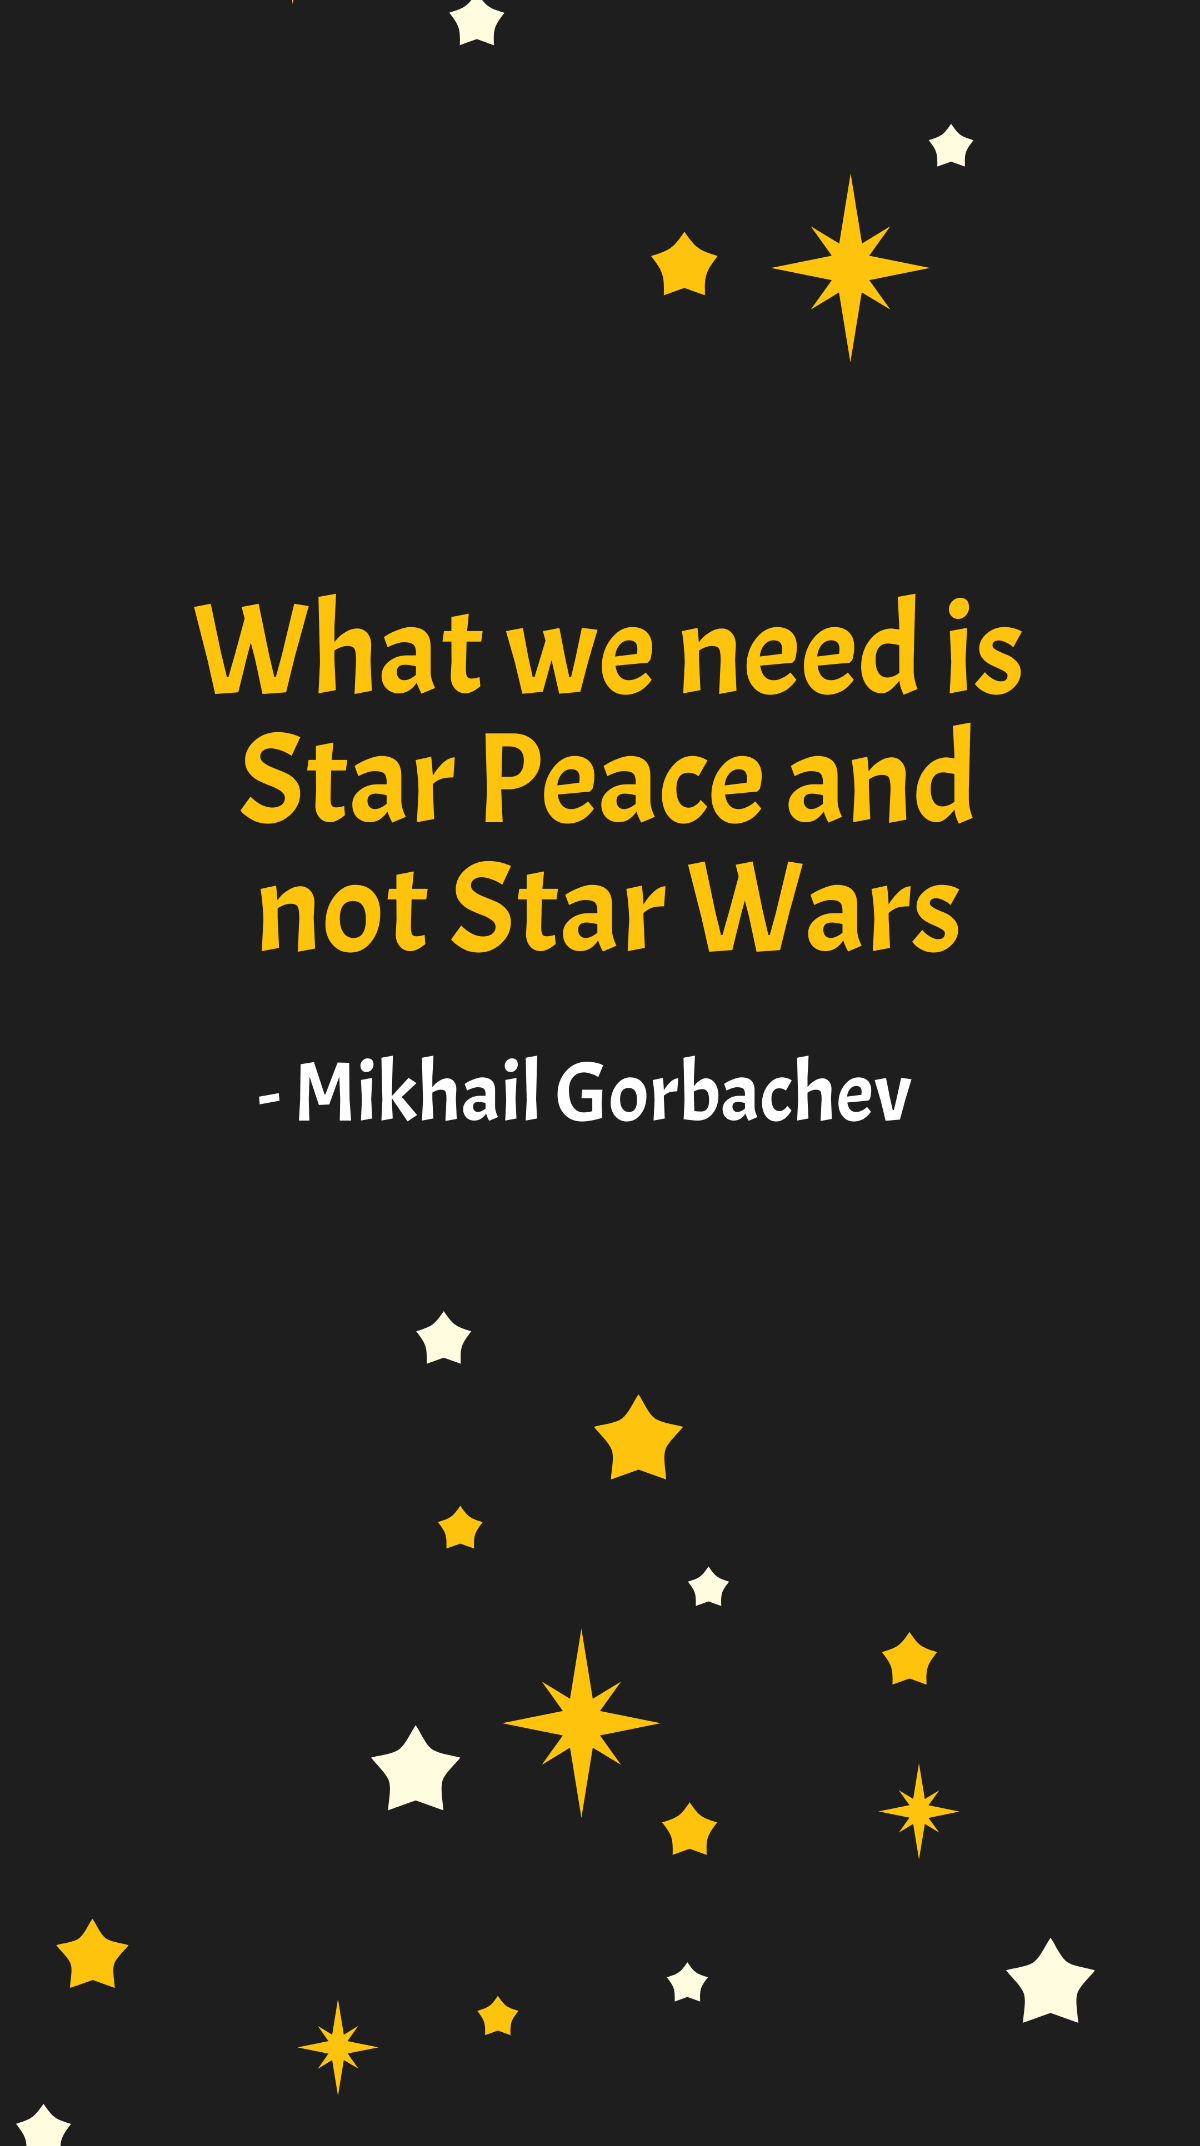 Mikhail Gorbachev - What we need is Star Peace and not Star Wars